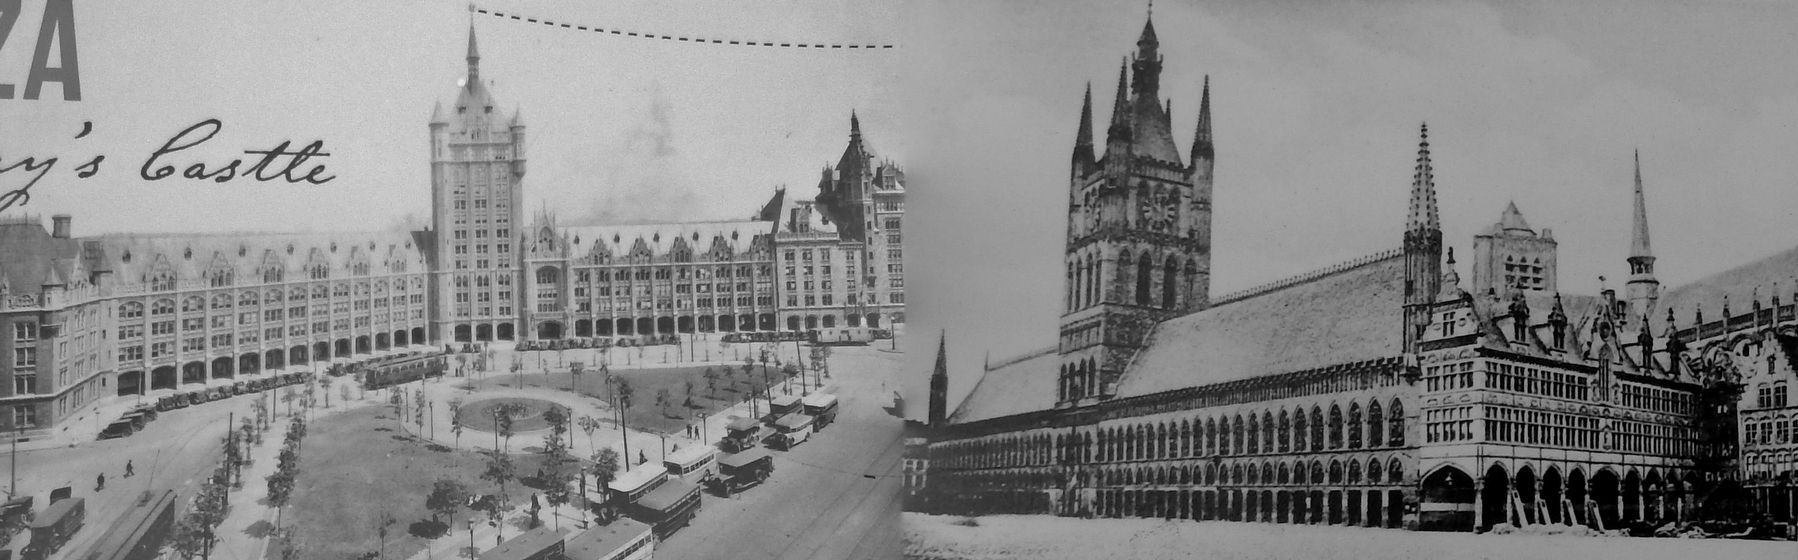 SUNY Plaza's design was inspired by the Cloth Guild Hall in Ypres, Belgium, completed in 1304</i> image. Click for full size.